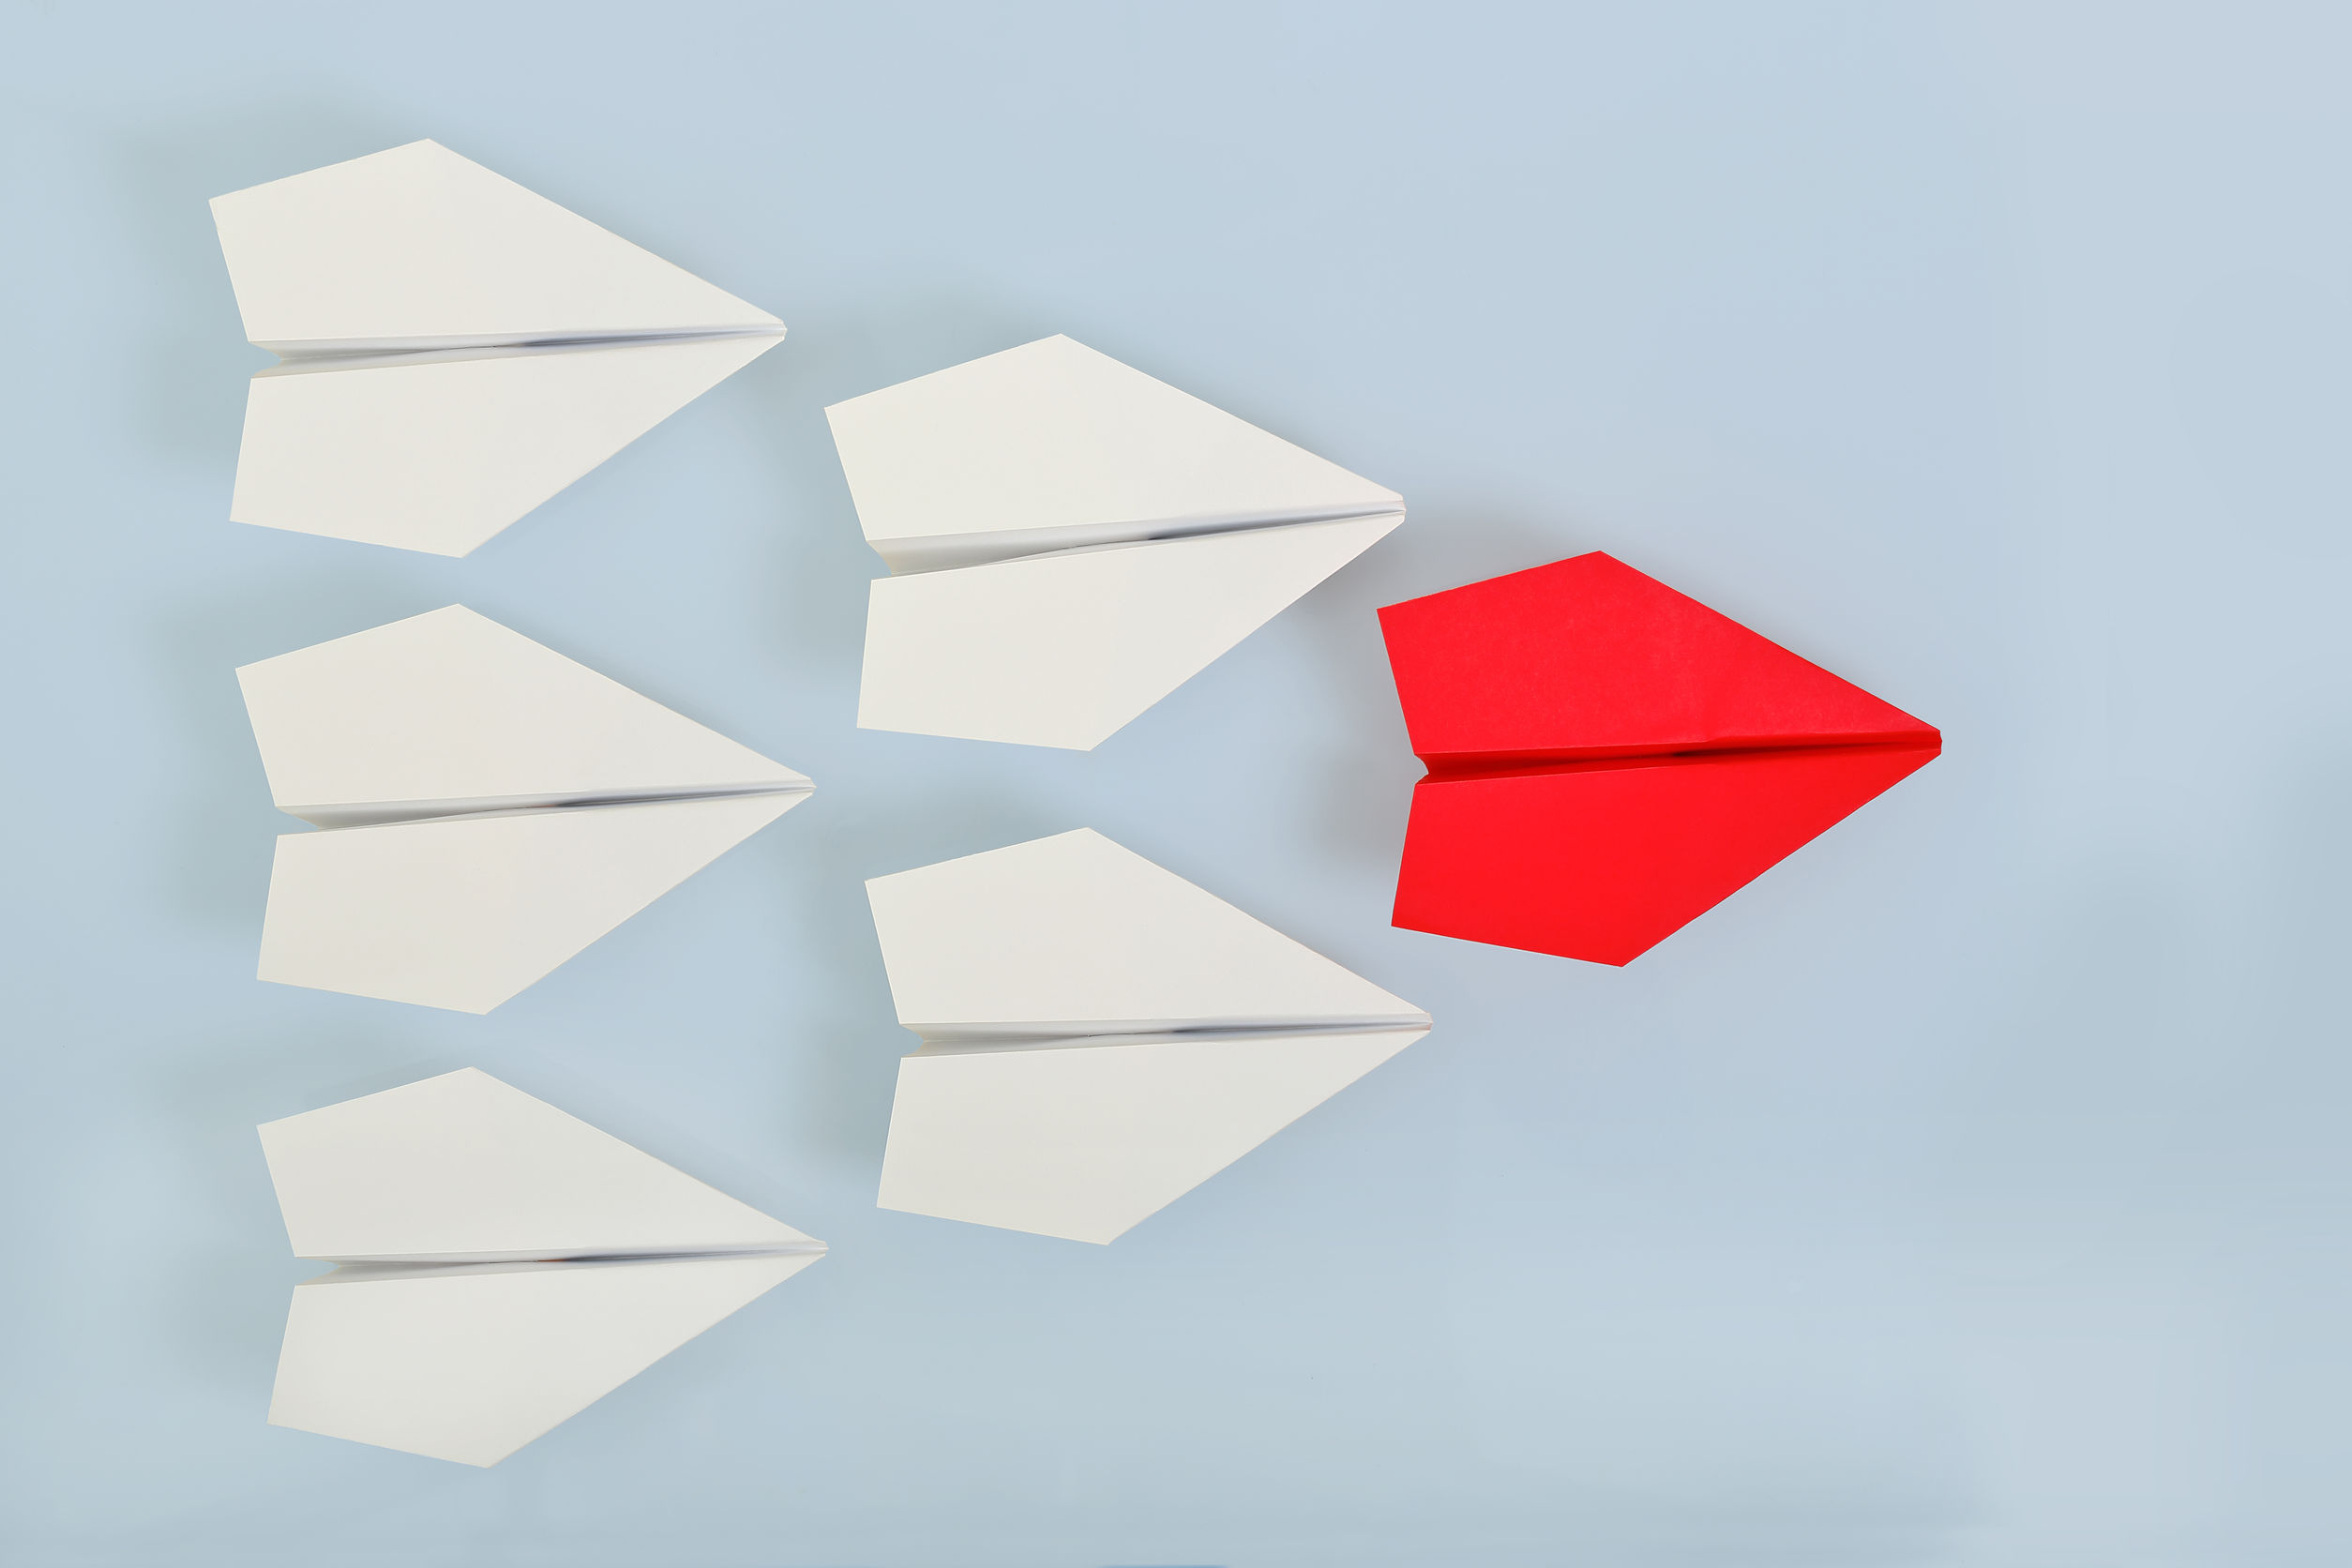 A red origami plane leading several white origami planes